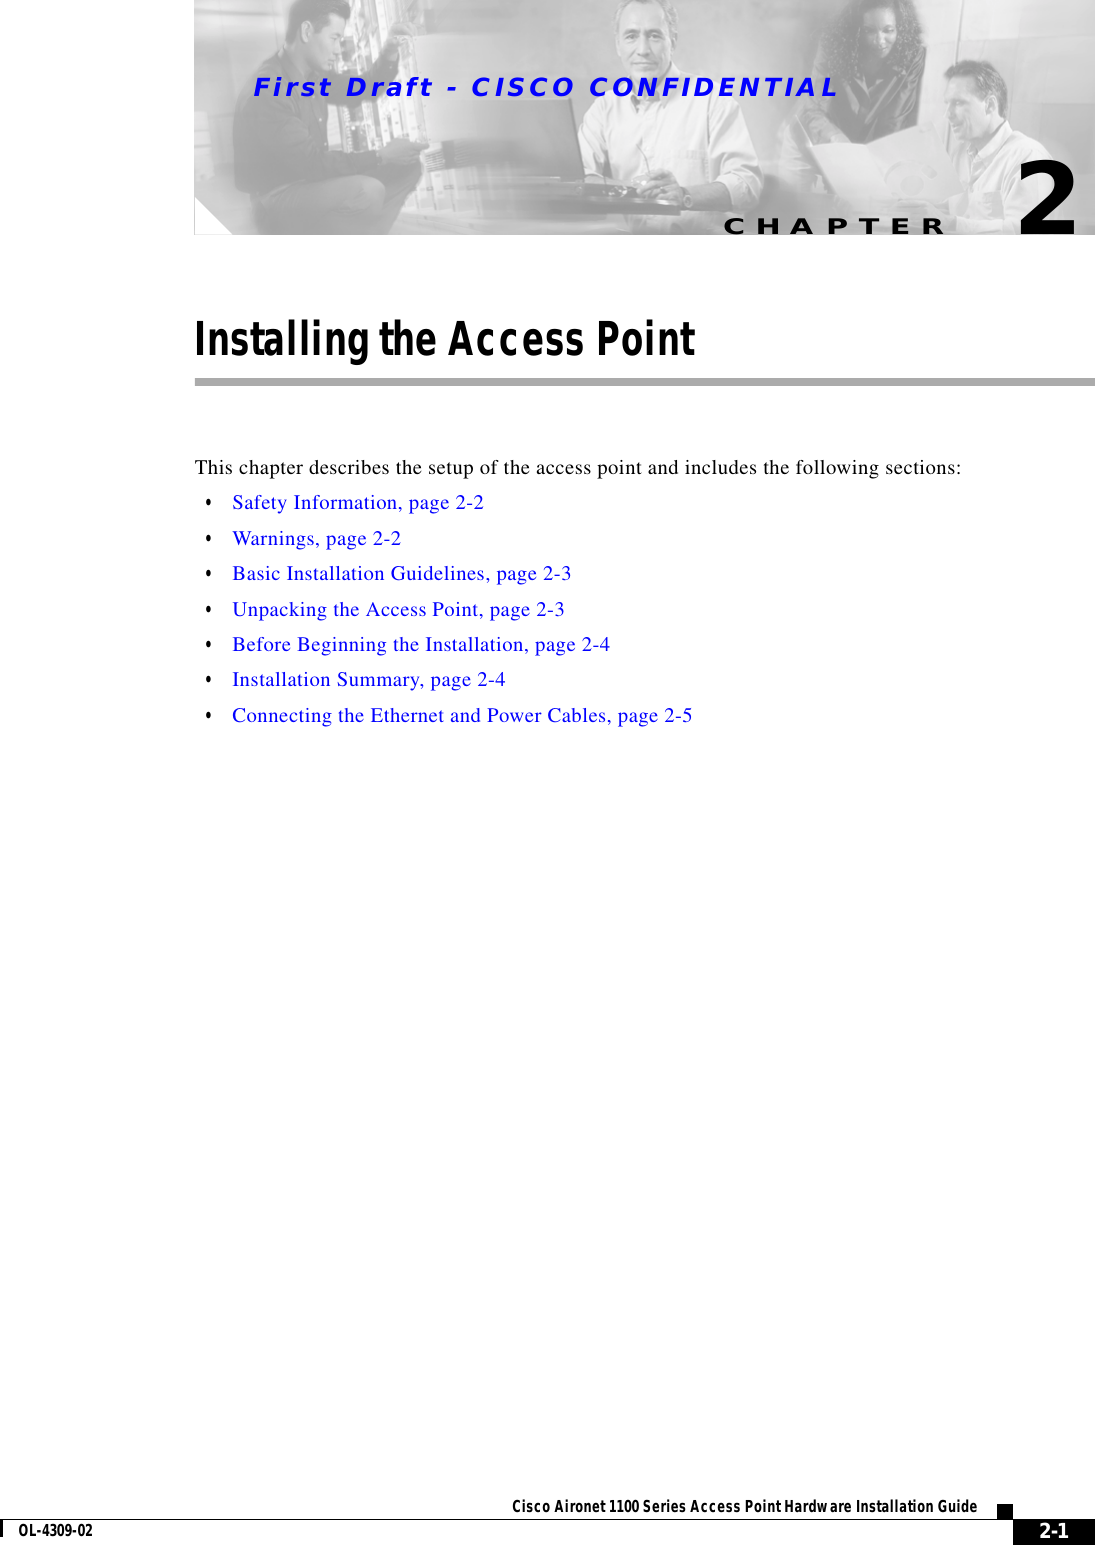 CHAPTERFirst Draft - CISCO CONFIDENTIAL2-1Cisco Aironet 1100 Series Access Point Hardware Installation GuideOL-4309-022Installing the Access PointThis chapter describes the setup of the access point and includes the following sections:•Safety Information, page 2-2•Warnings, page 2-2•Basic Installation Guidelines, page 2-3•Unpacking the Access Point, page 2-3•Before Beginning the Installation, page 2-4•Installation Summary, page 2-4•Connecting the Ethernet and Power Cables, page 2-5